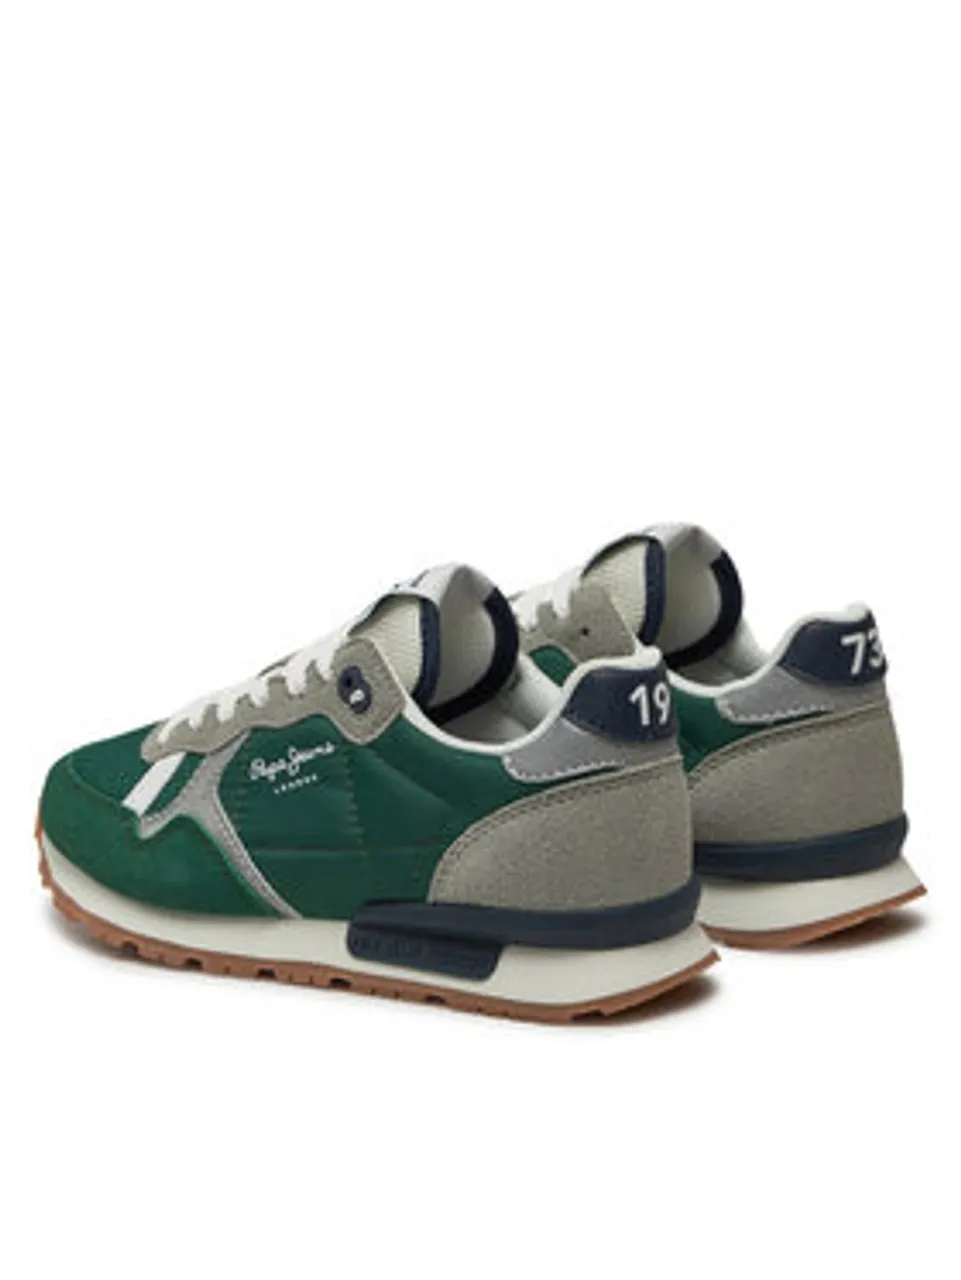 Pepe Jeans Sneakers Brit Young B PBS40003 Grün